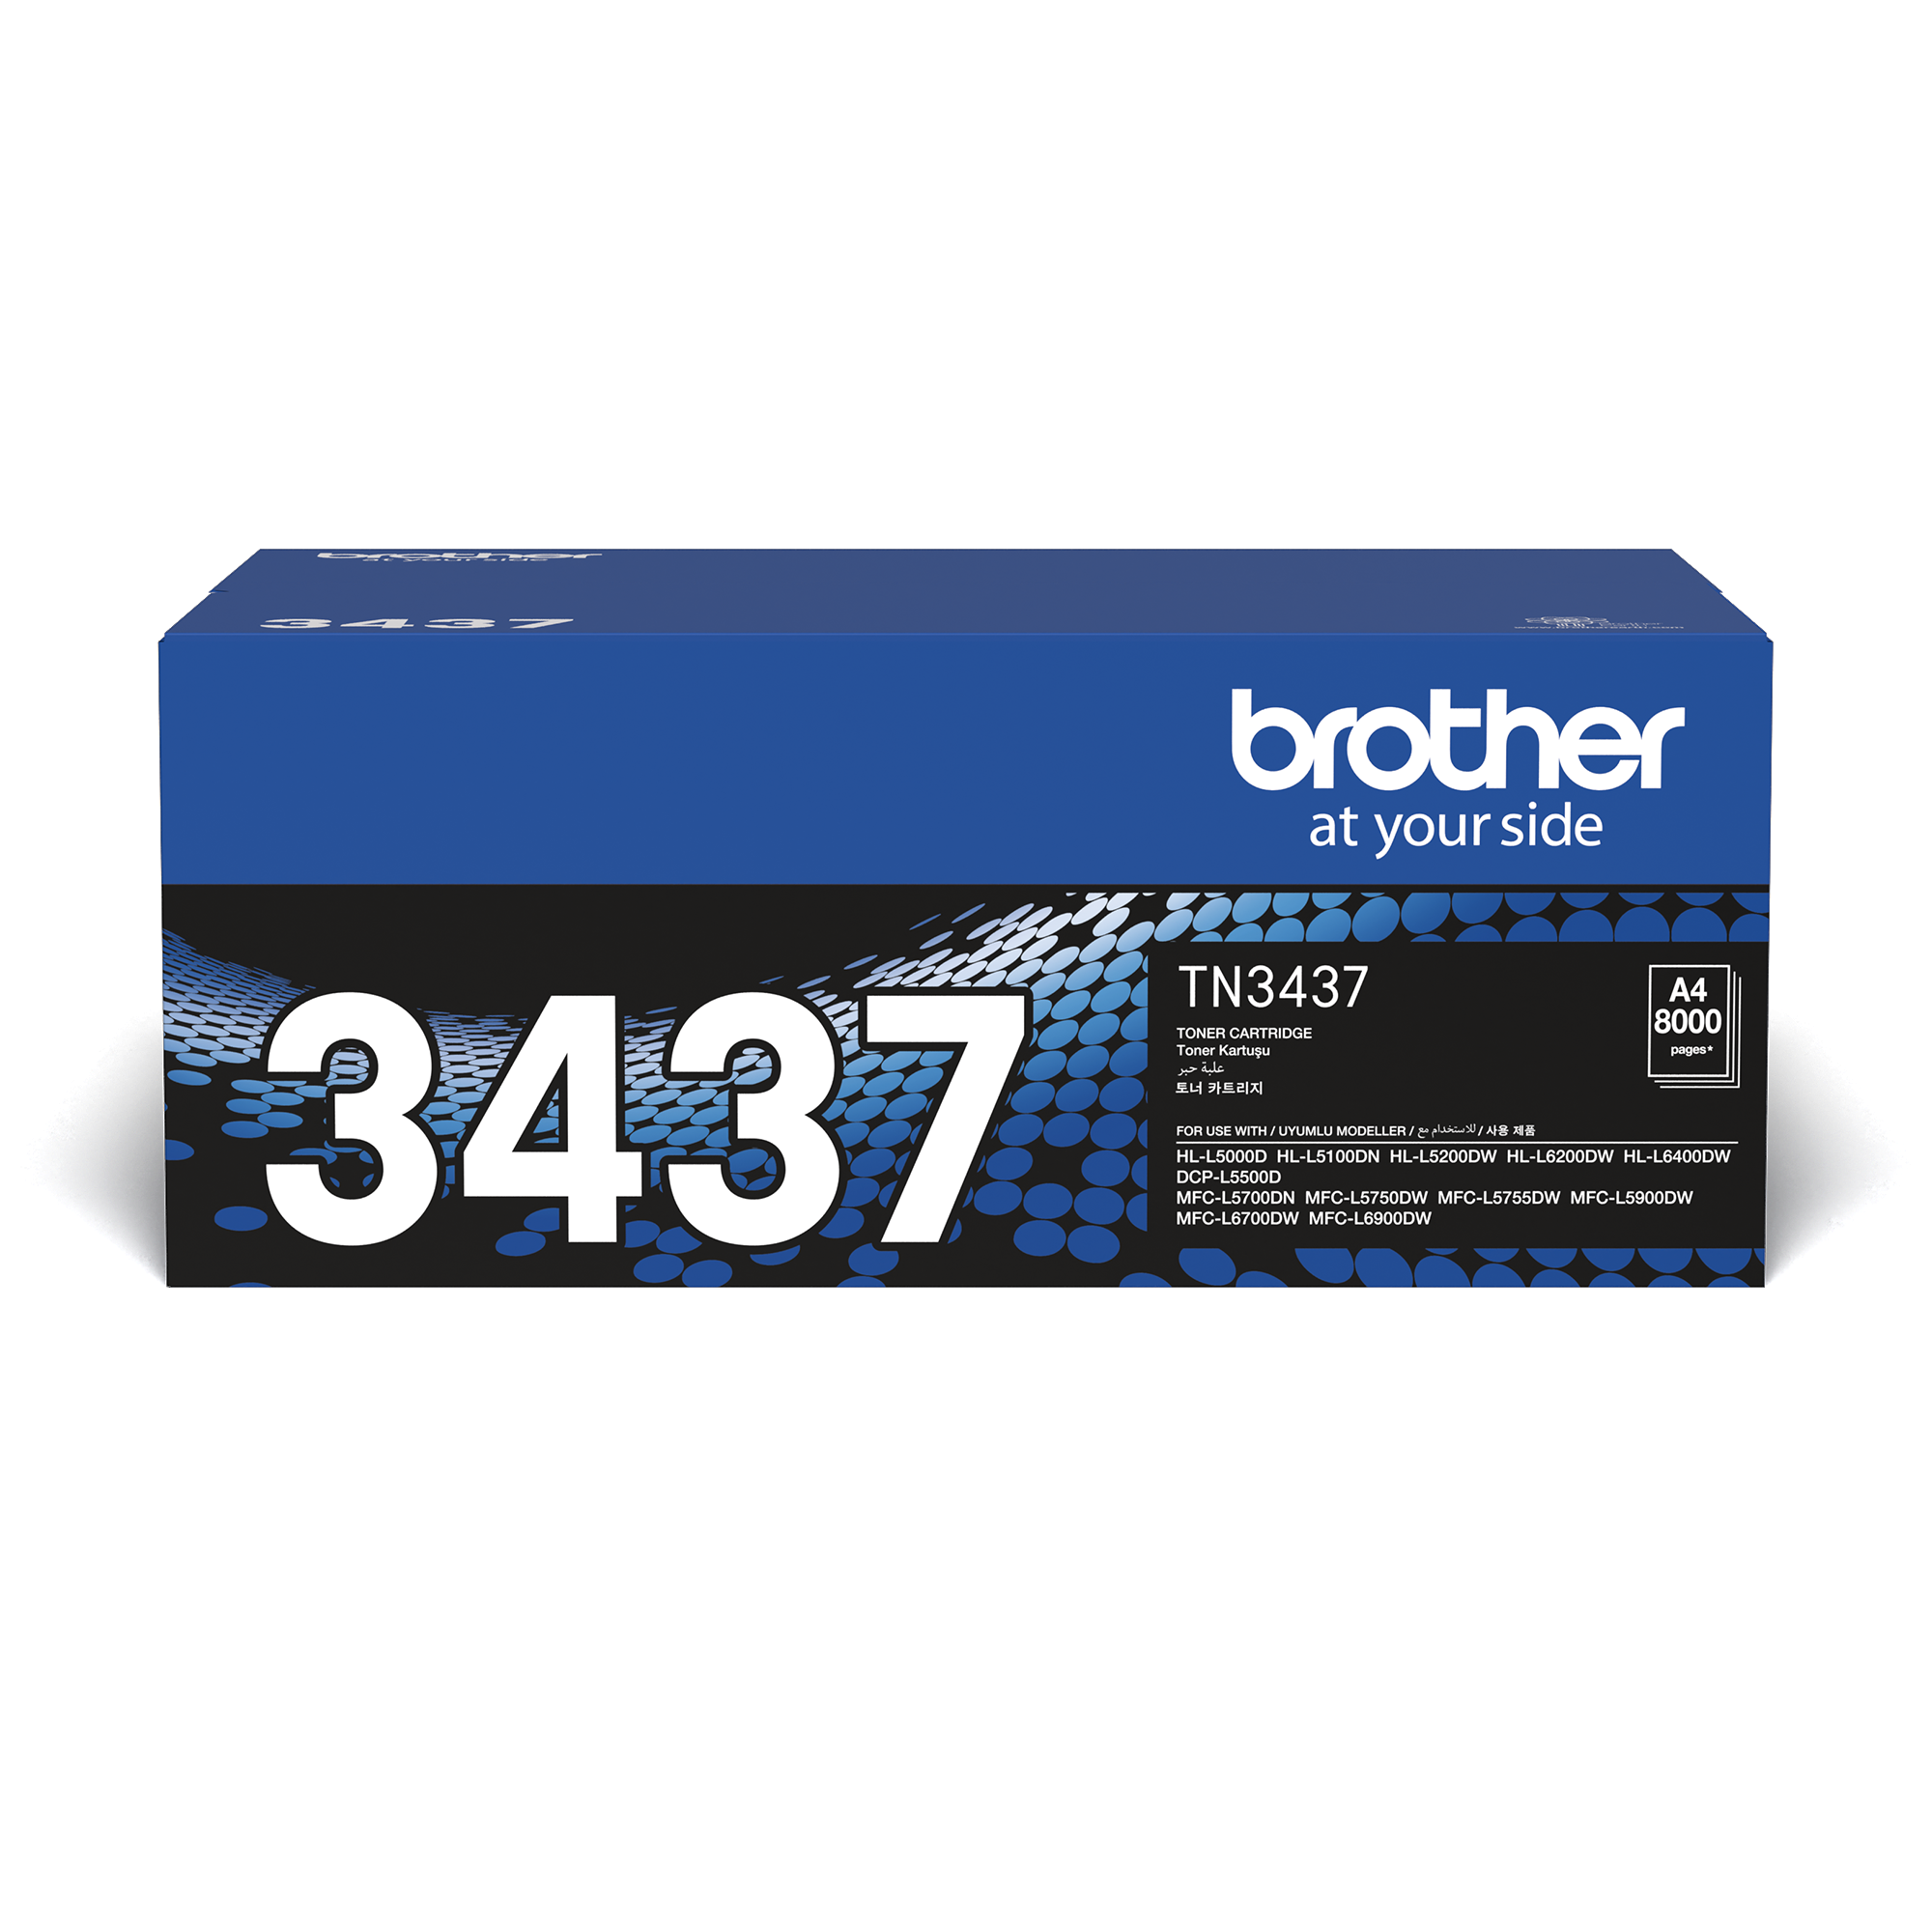 Brother TN-3437 Black Toner Cartridge (8000 Pages)